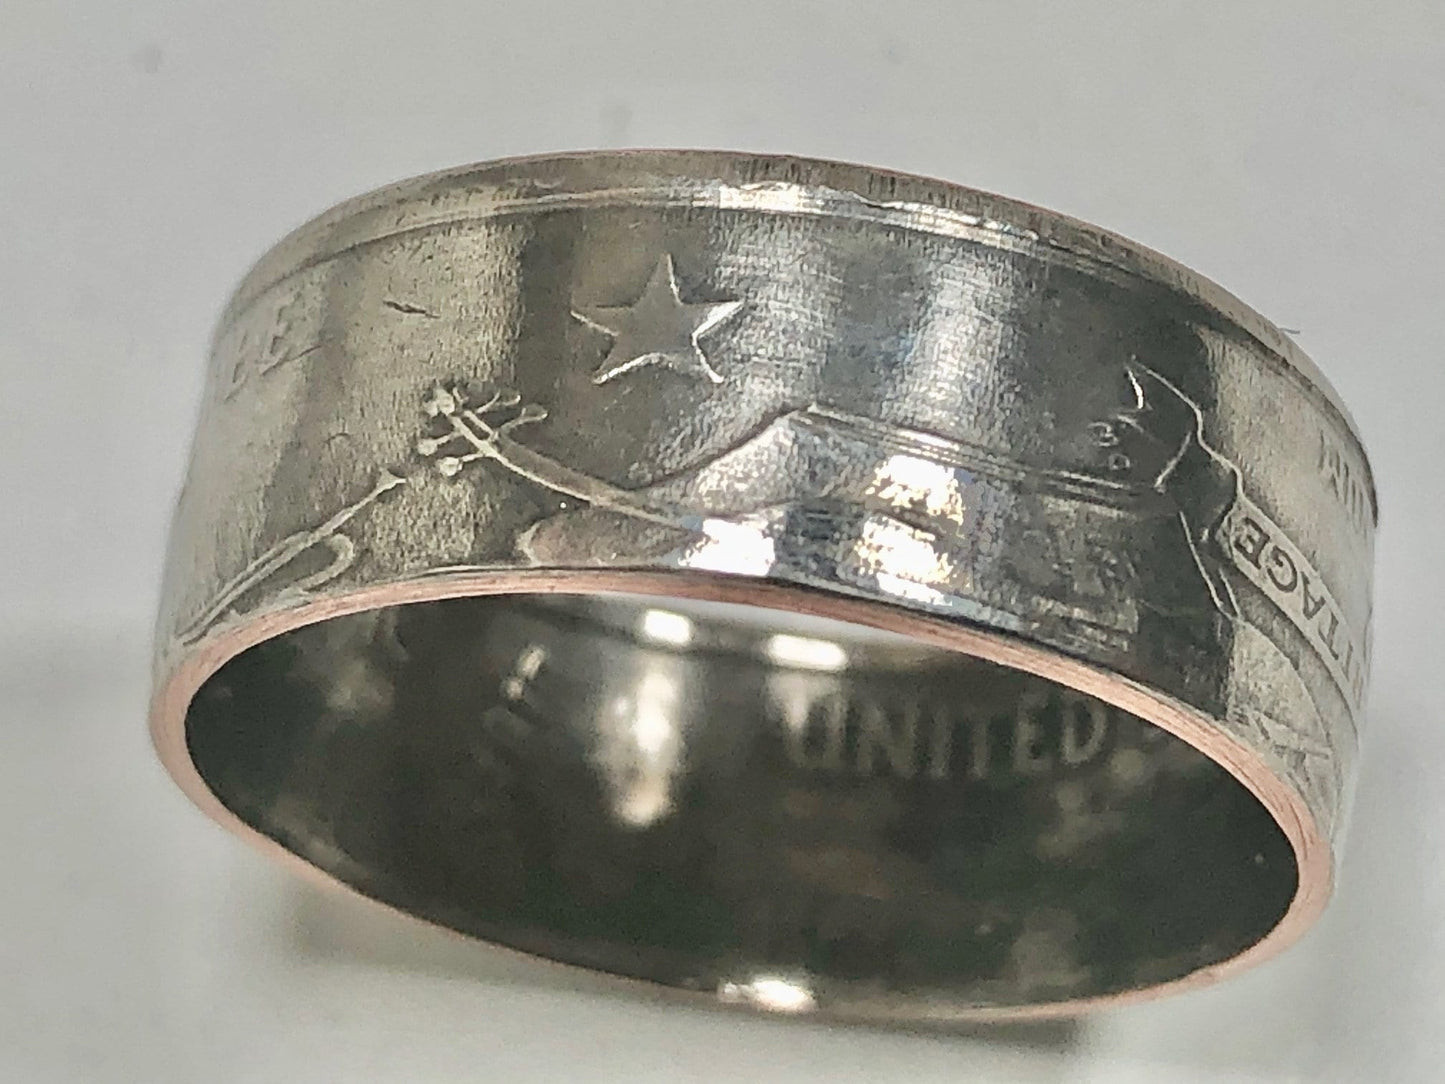 Tennessee Ring State Quarter Coin Ring